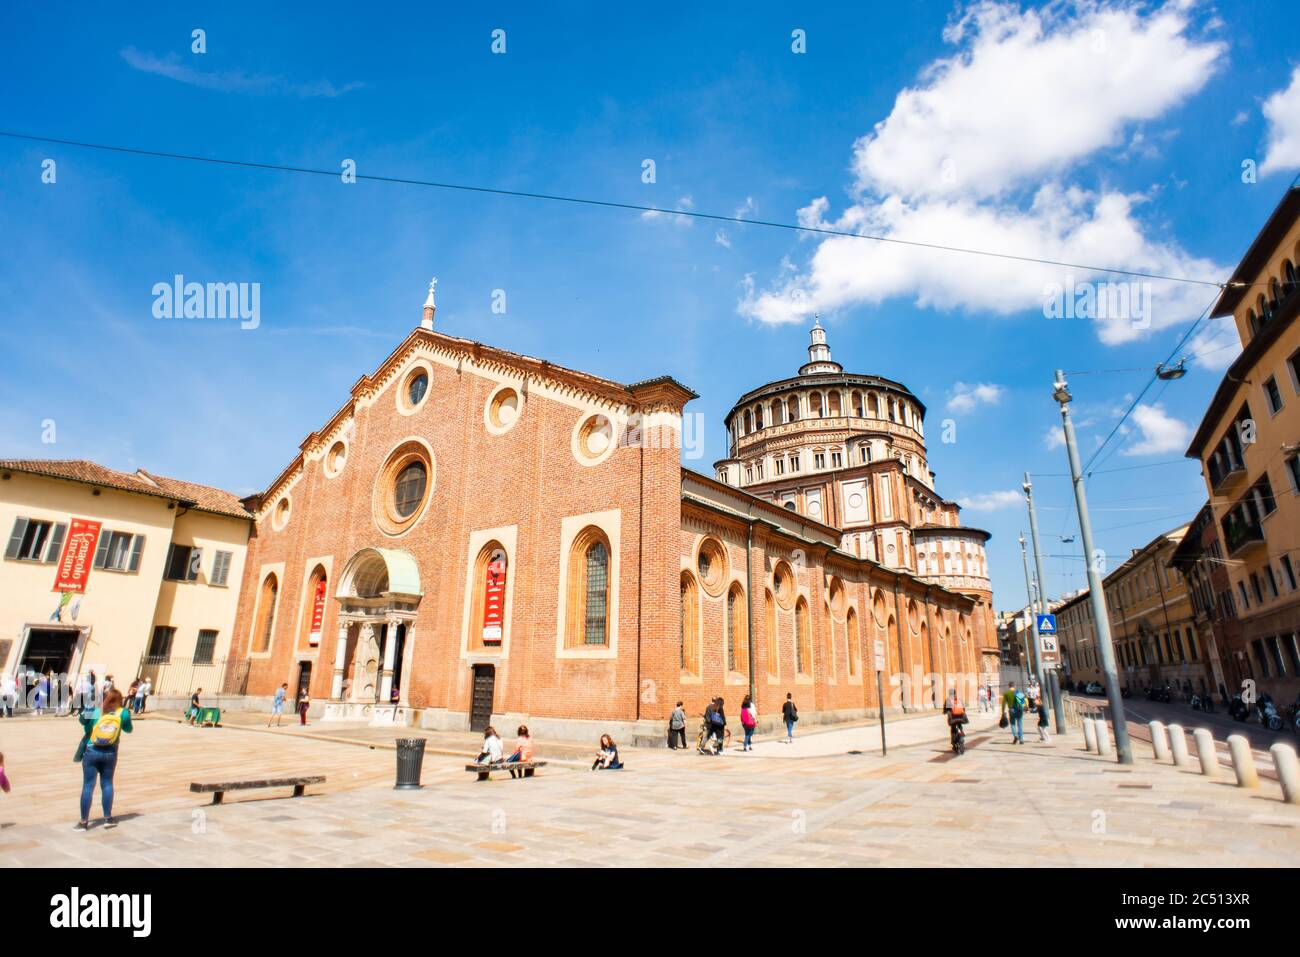 Milan. Italy - May 22, 2019: Facade of Church Santa Maria delle Grazie (Milan, Italy). The Home of 'The Last Supper'. Stock Photo